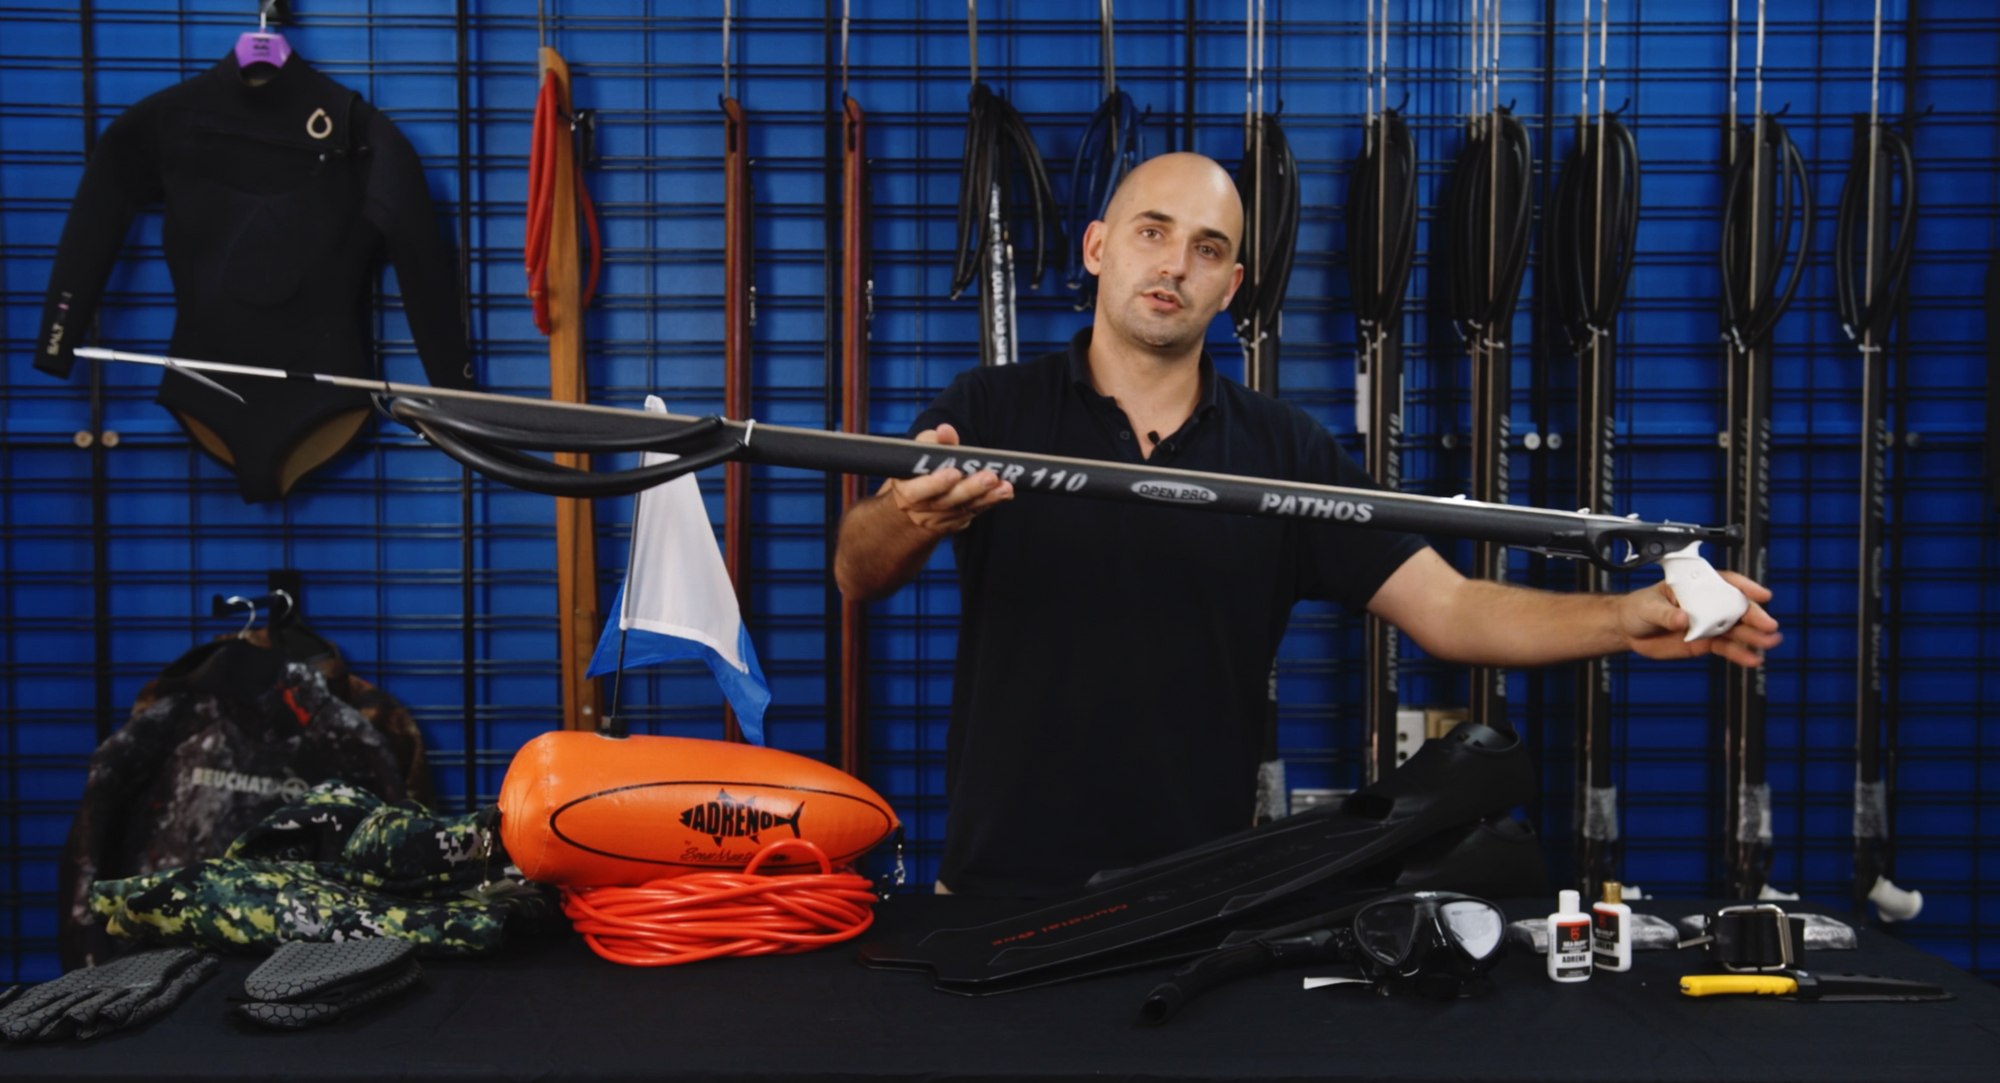 Beginner Spearfishing Gear - What You Need To Get Started